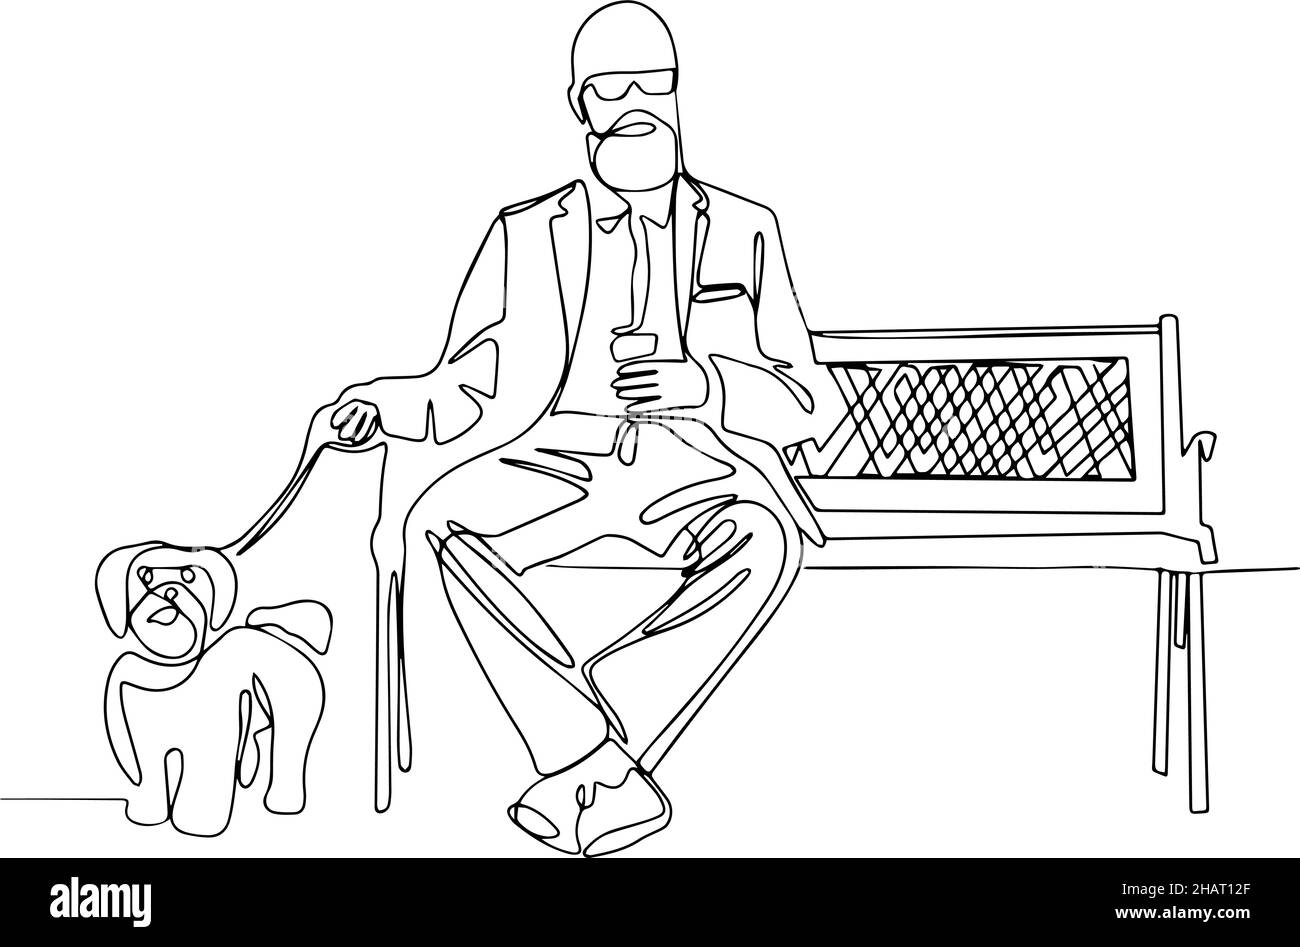 bearded man sitting on a bench with a cup of take away coffee and a dog on a leash Stock Vector